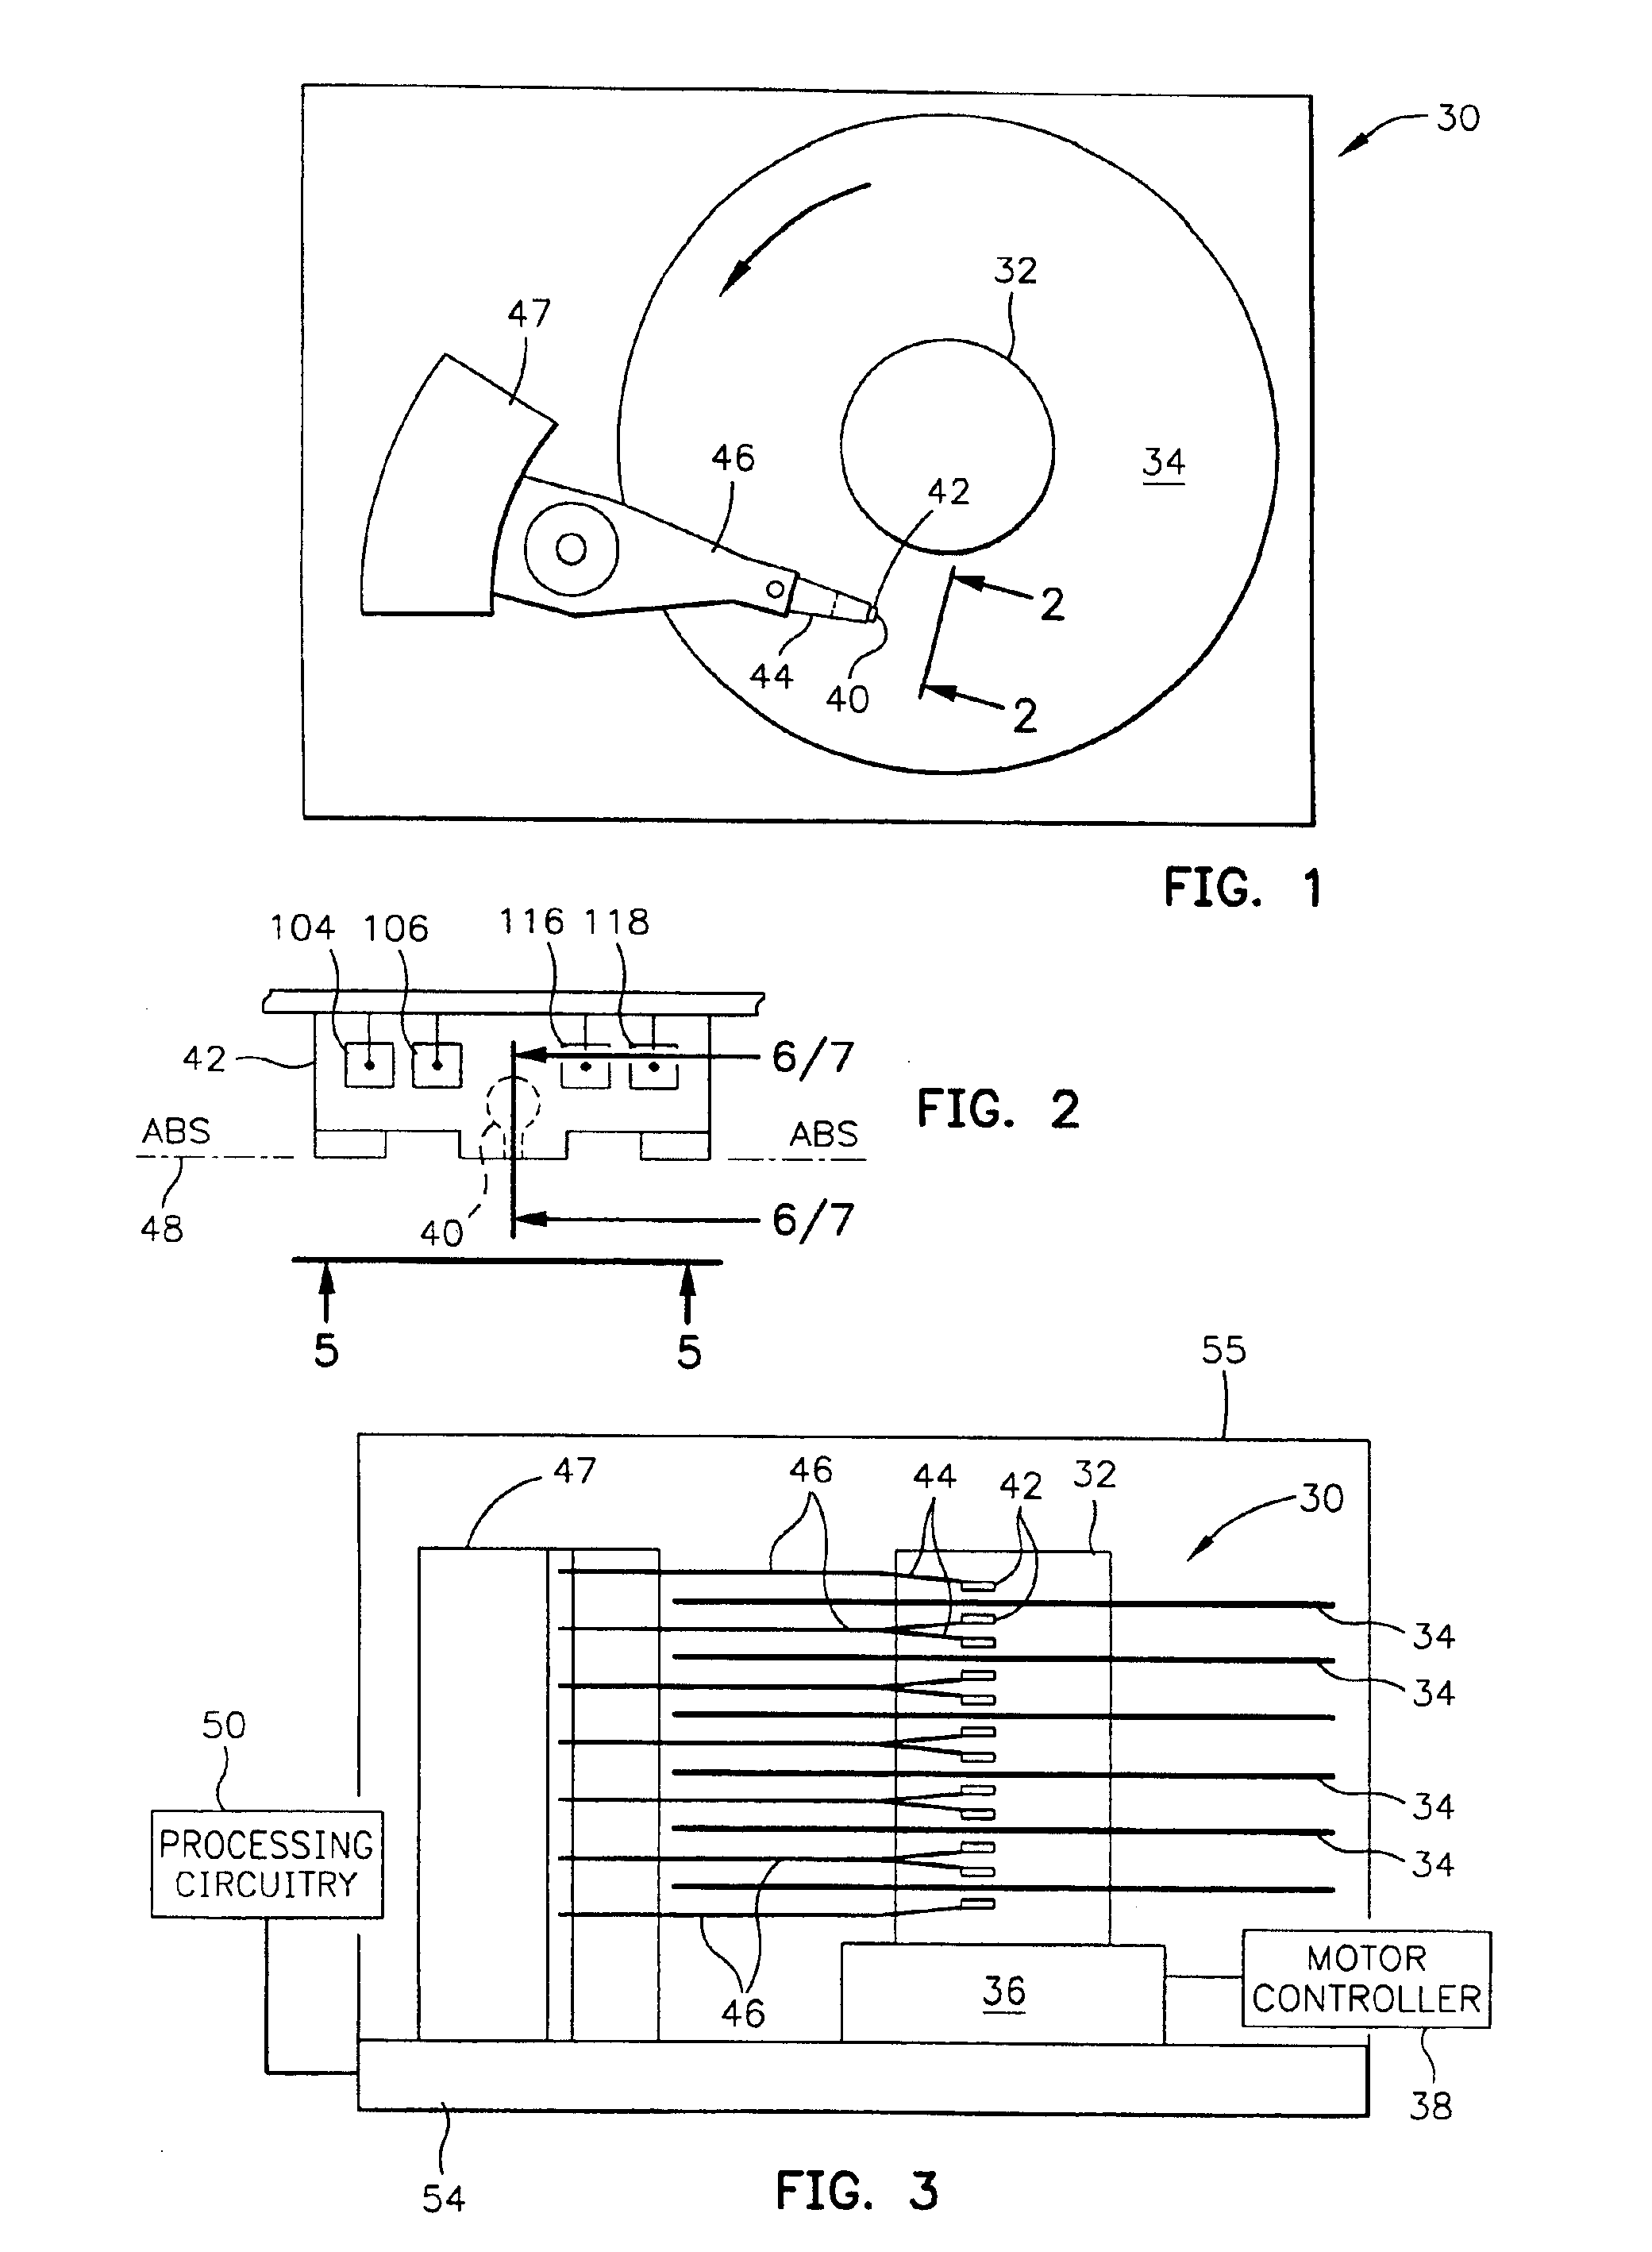 Method of reducing ESD damage in thin film read heads which enables measurement of gap resistance